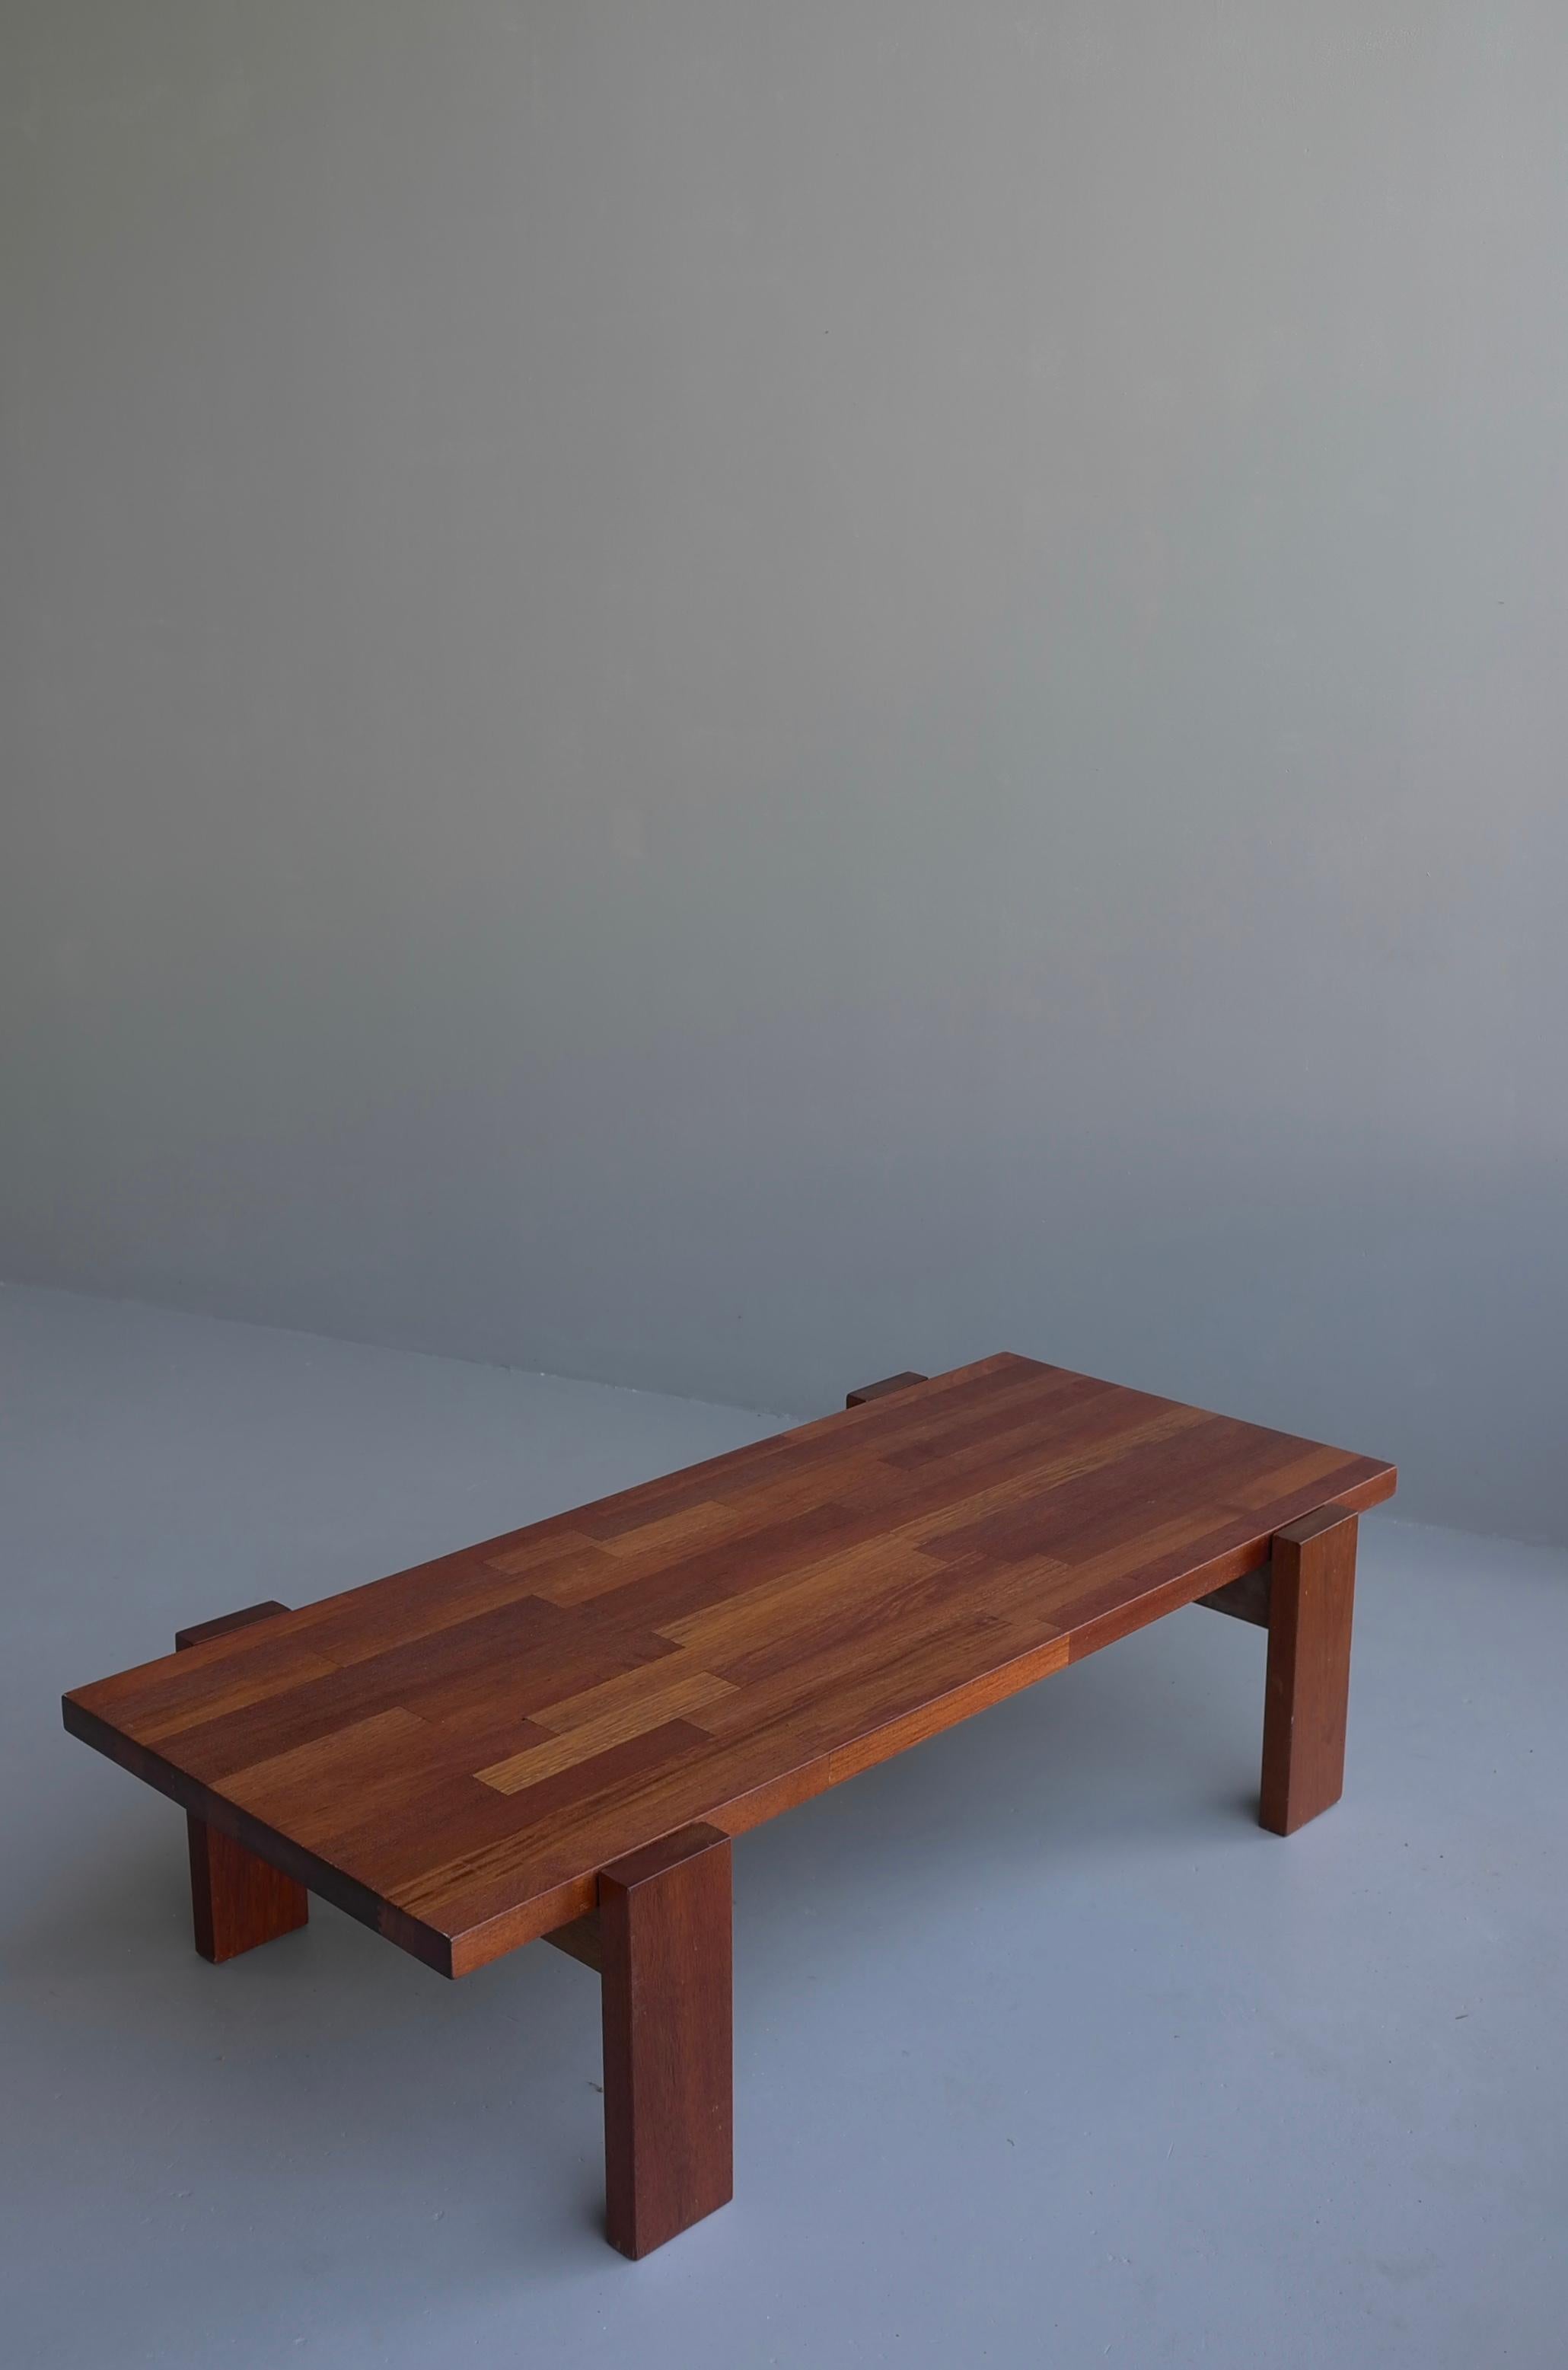 Mid-20th Century Robust Hardwood Coffee Table in Style of Jorge Zalszupin, Brazil, 1960s For Sale